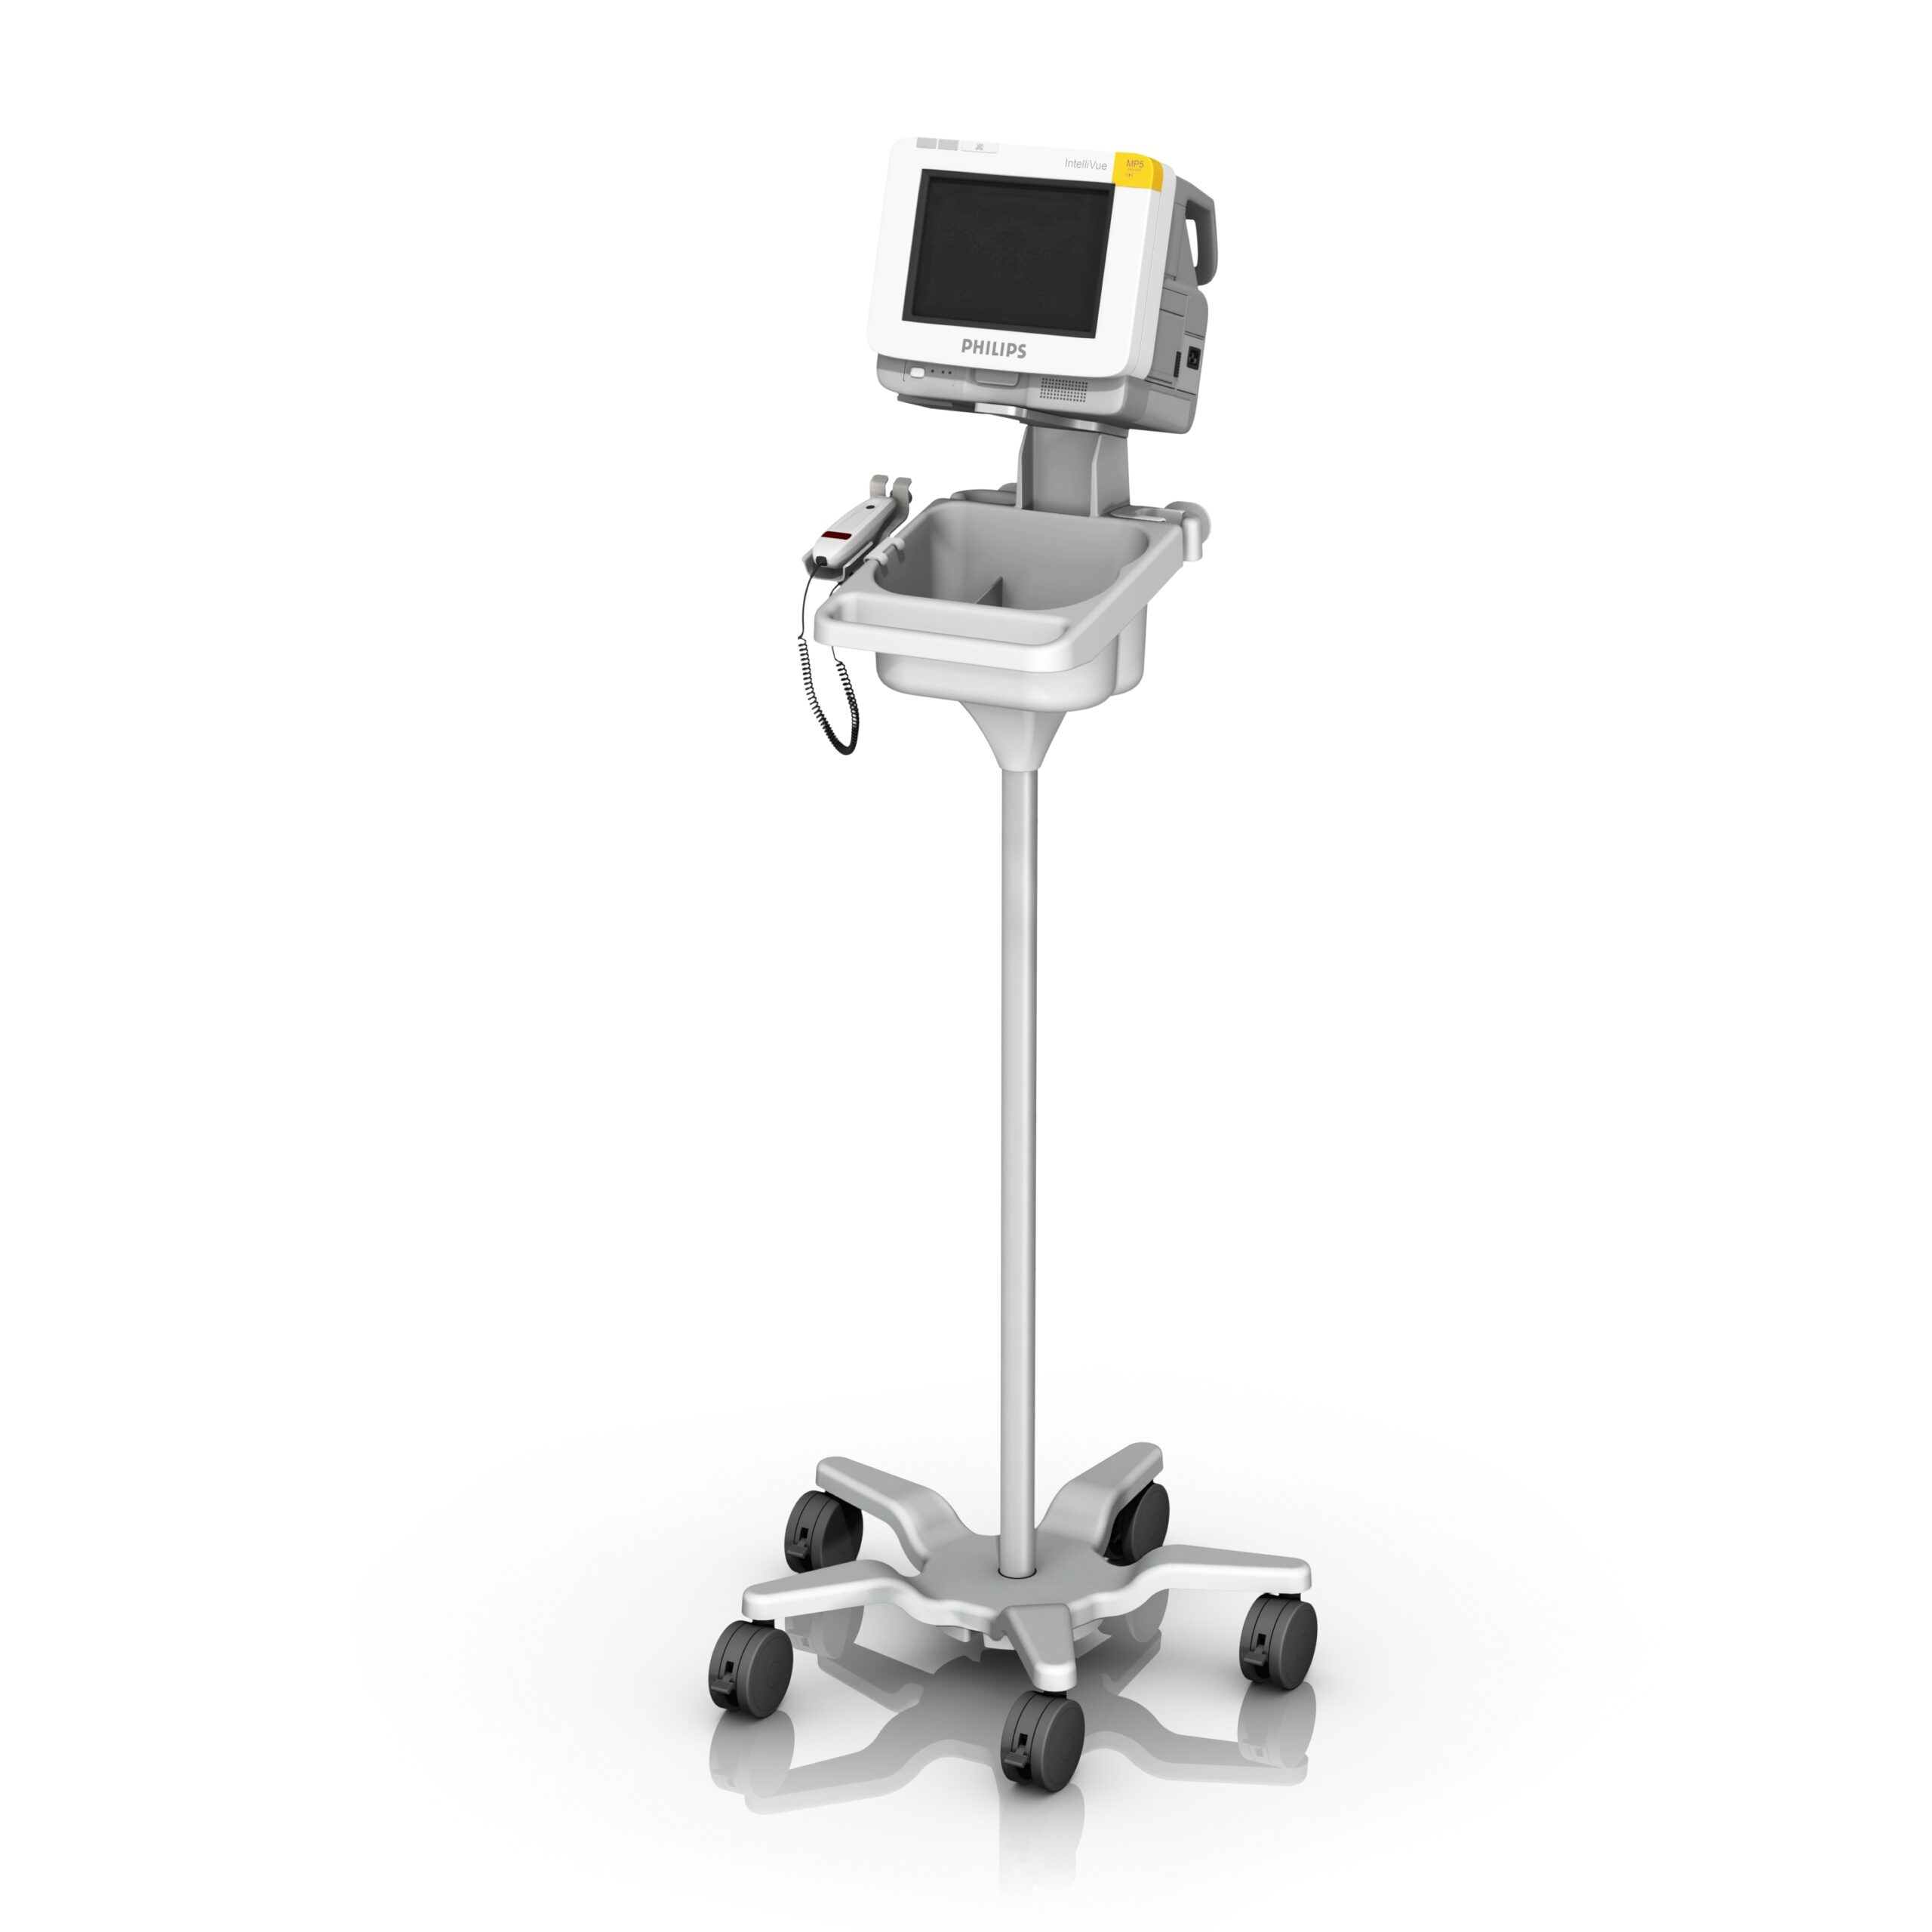 Philips Temporal Scanner ph008060 roll Stand